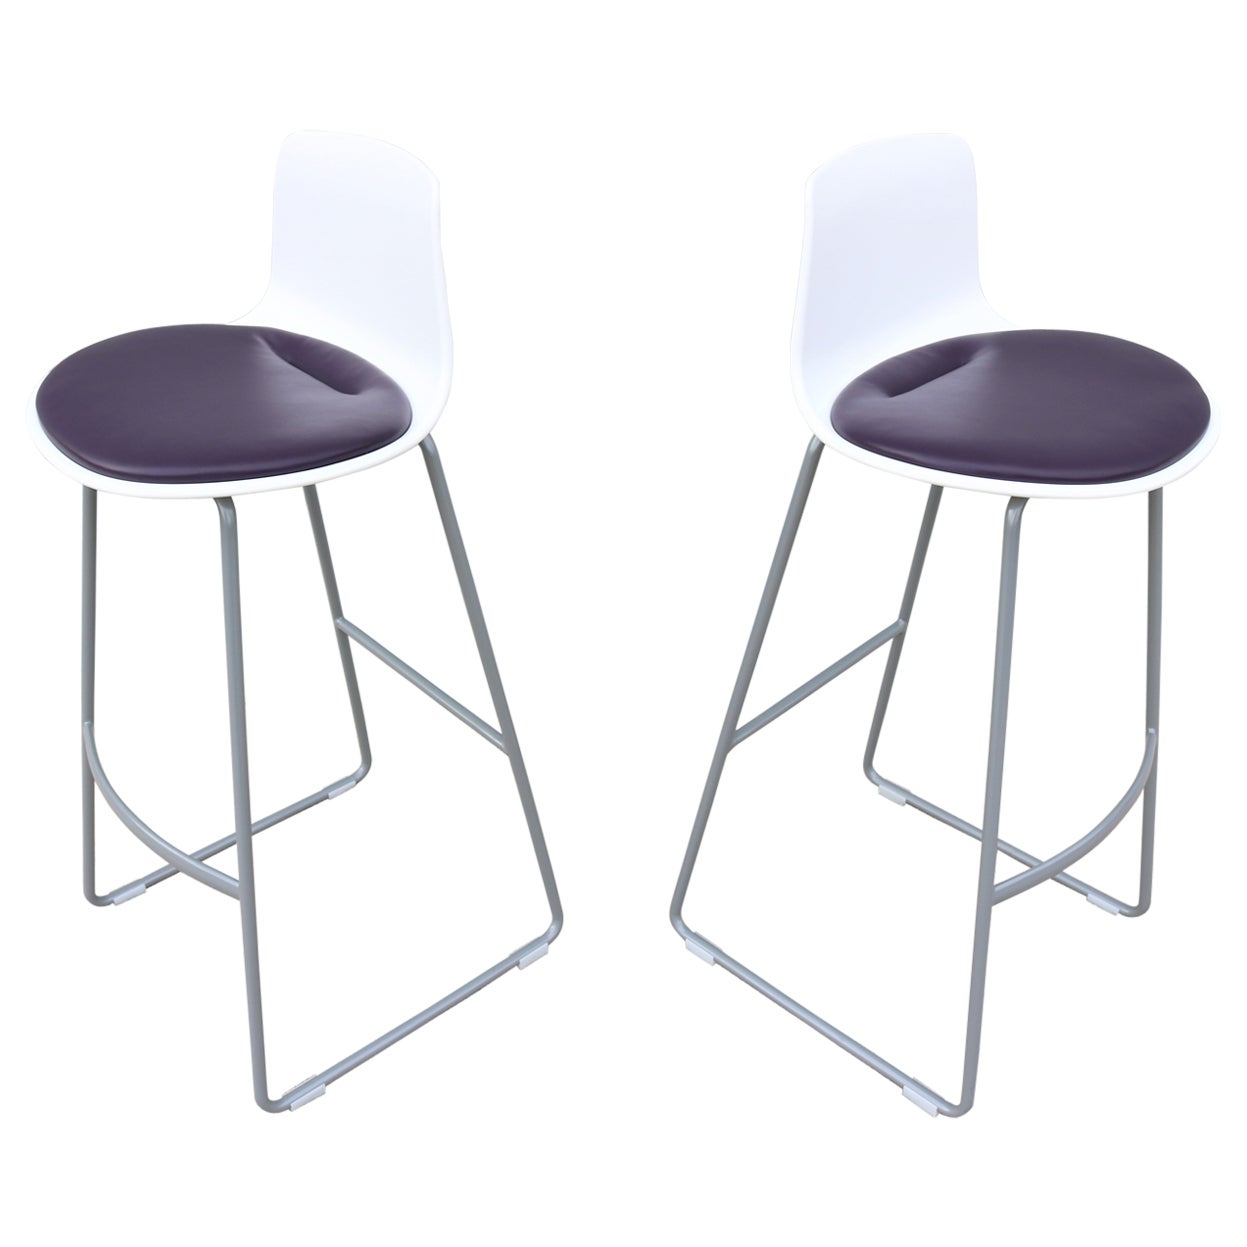 Modern Lievore Altherr Molina for Coalesse Enea Lottus Bar Stools New, a Pair For Sale